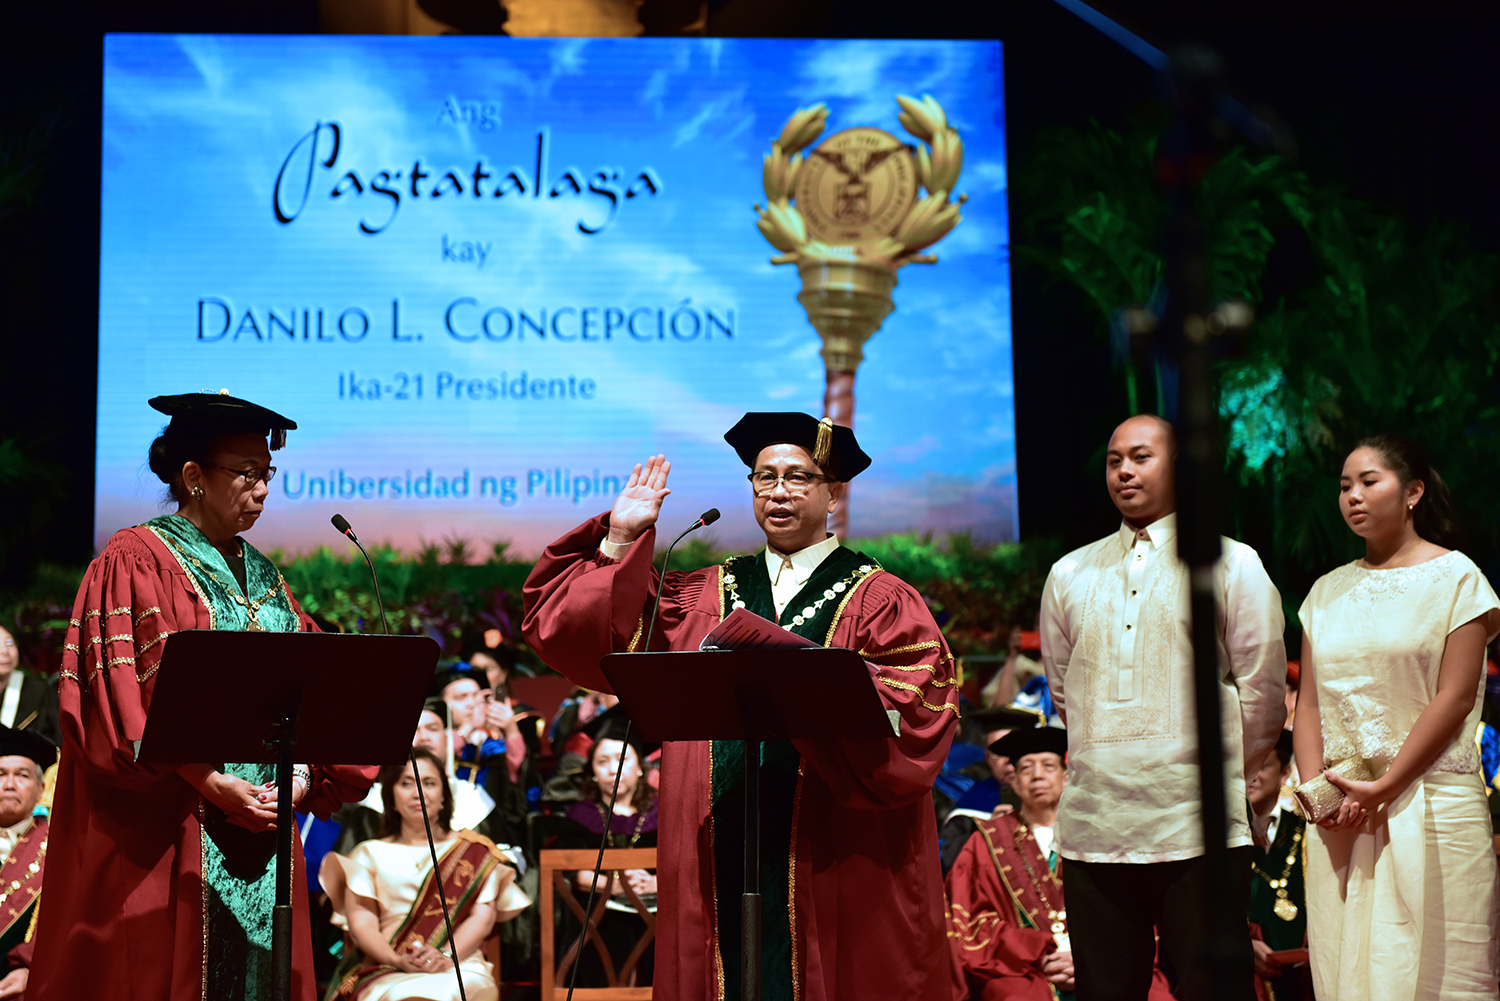 THE VOW. Danilo Concepcion takes his oath as UP's 21st president during his investiture on September 20. Photo from UP 